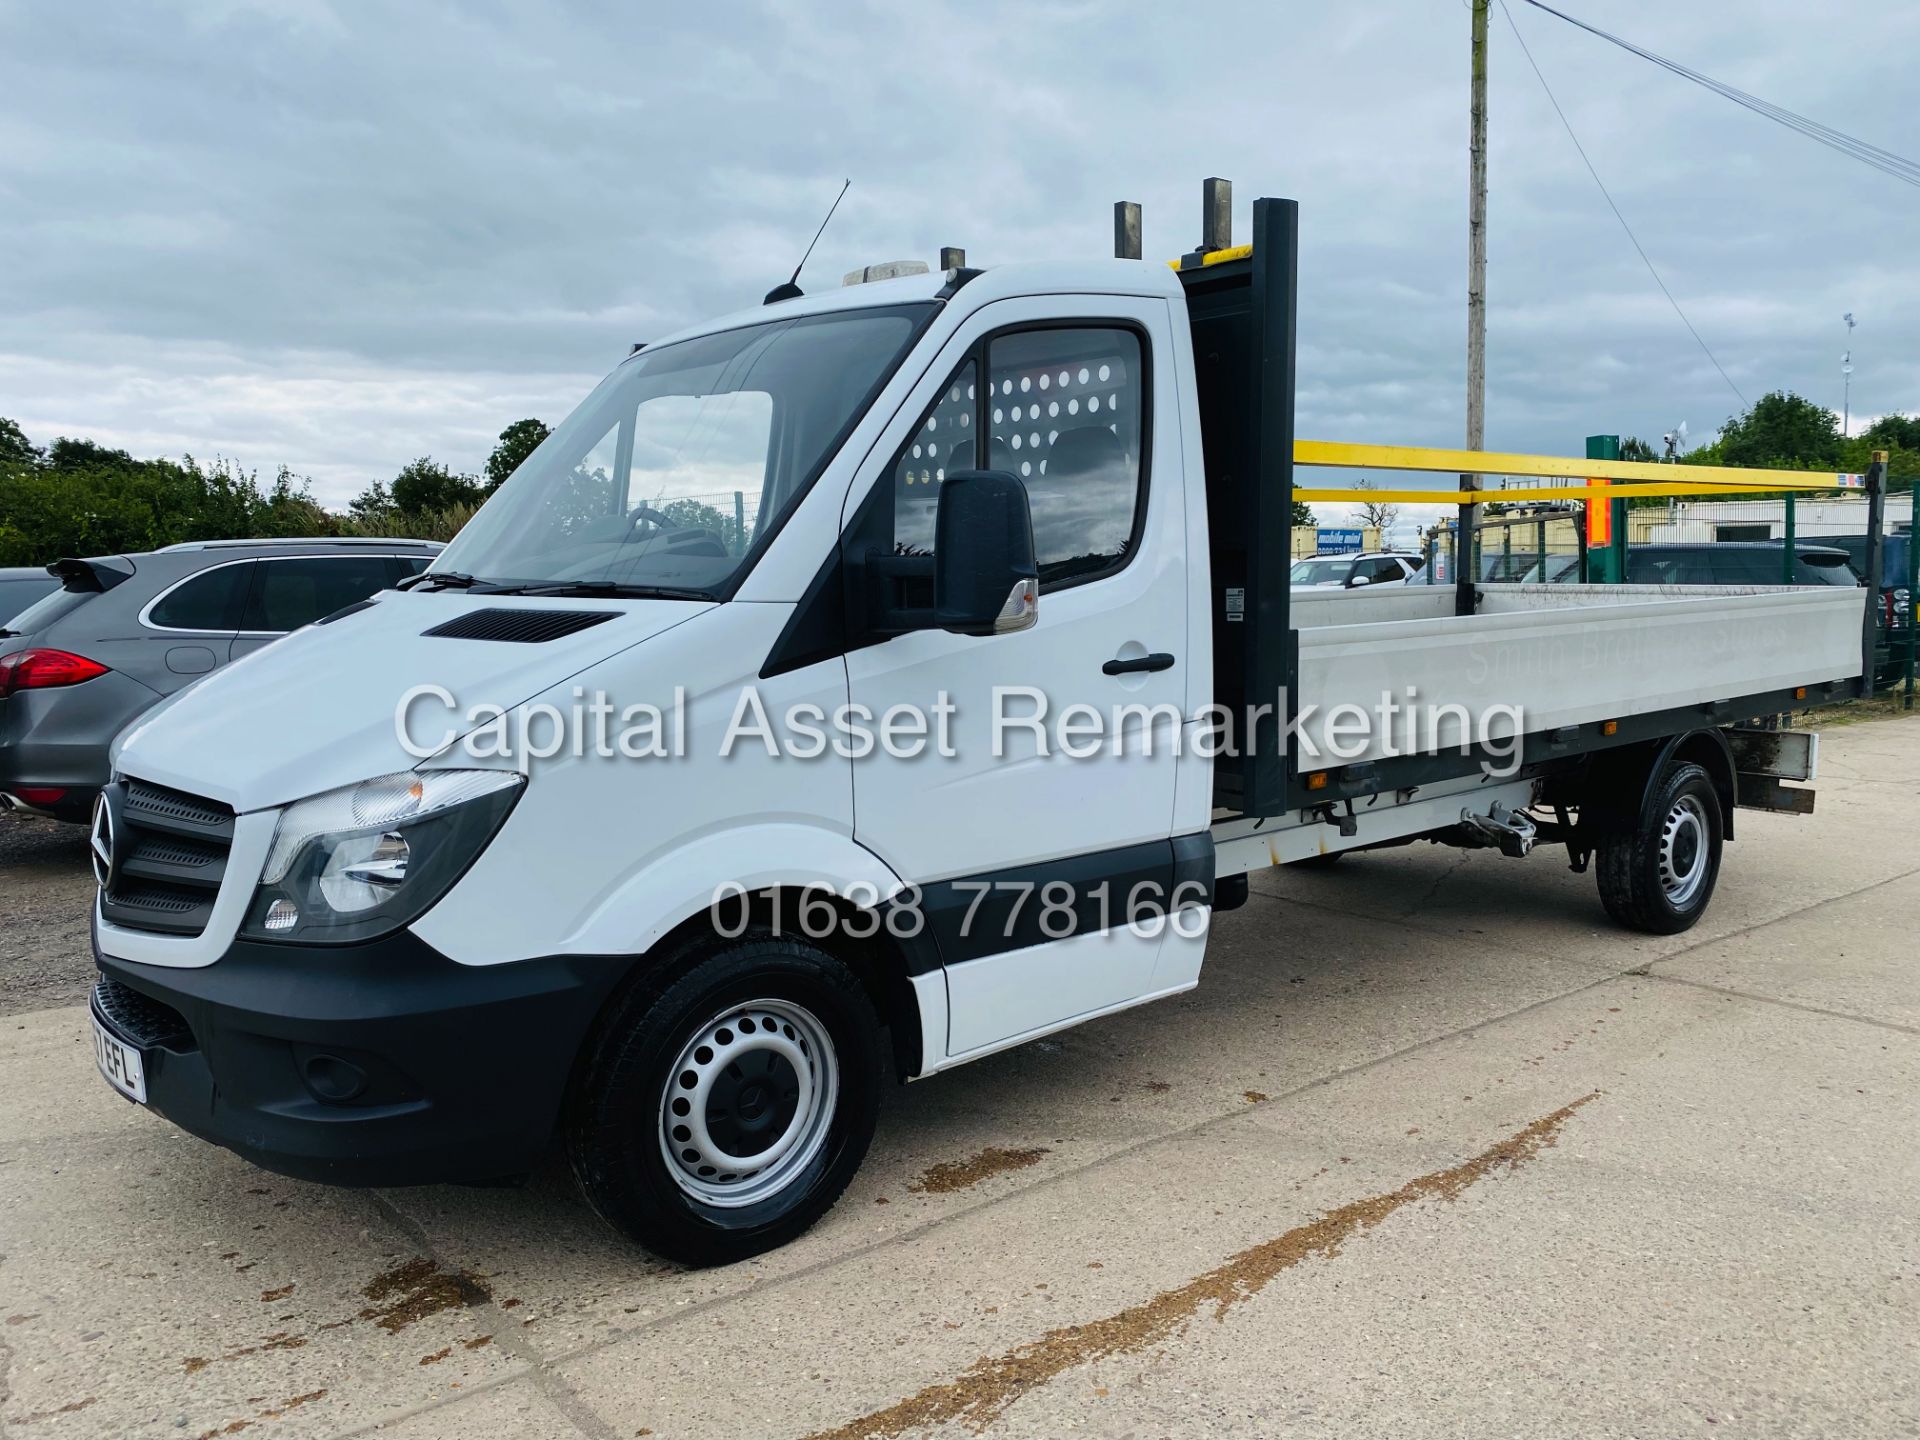 ON SALE MERCEDES SPRINTER 314CDI LWB DROPSIDE(2018 MODEL) 1 OWNER-14 FOOT ALLOY BODY-IDEAL SCAFFOLD - Image 2 of 17